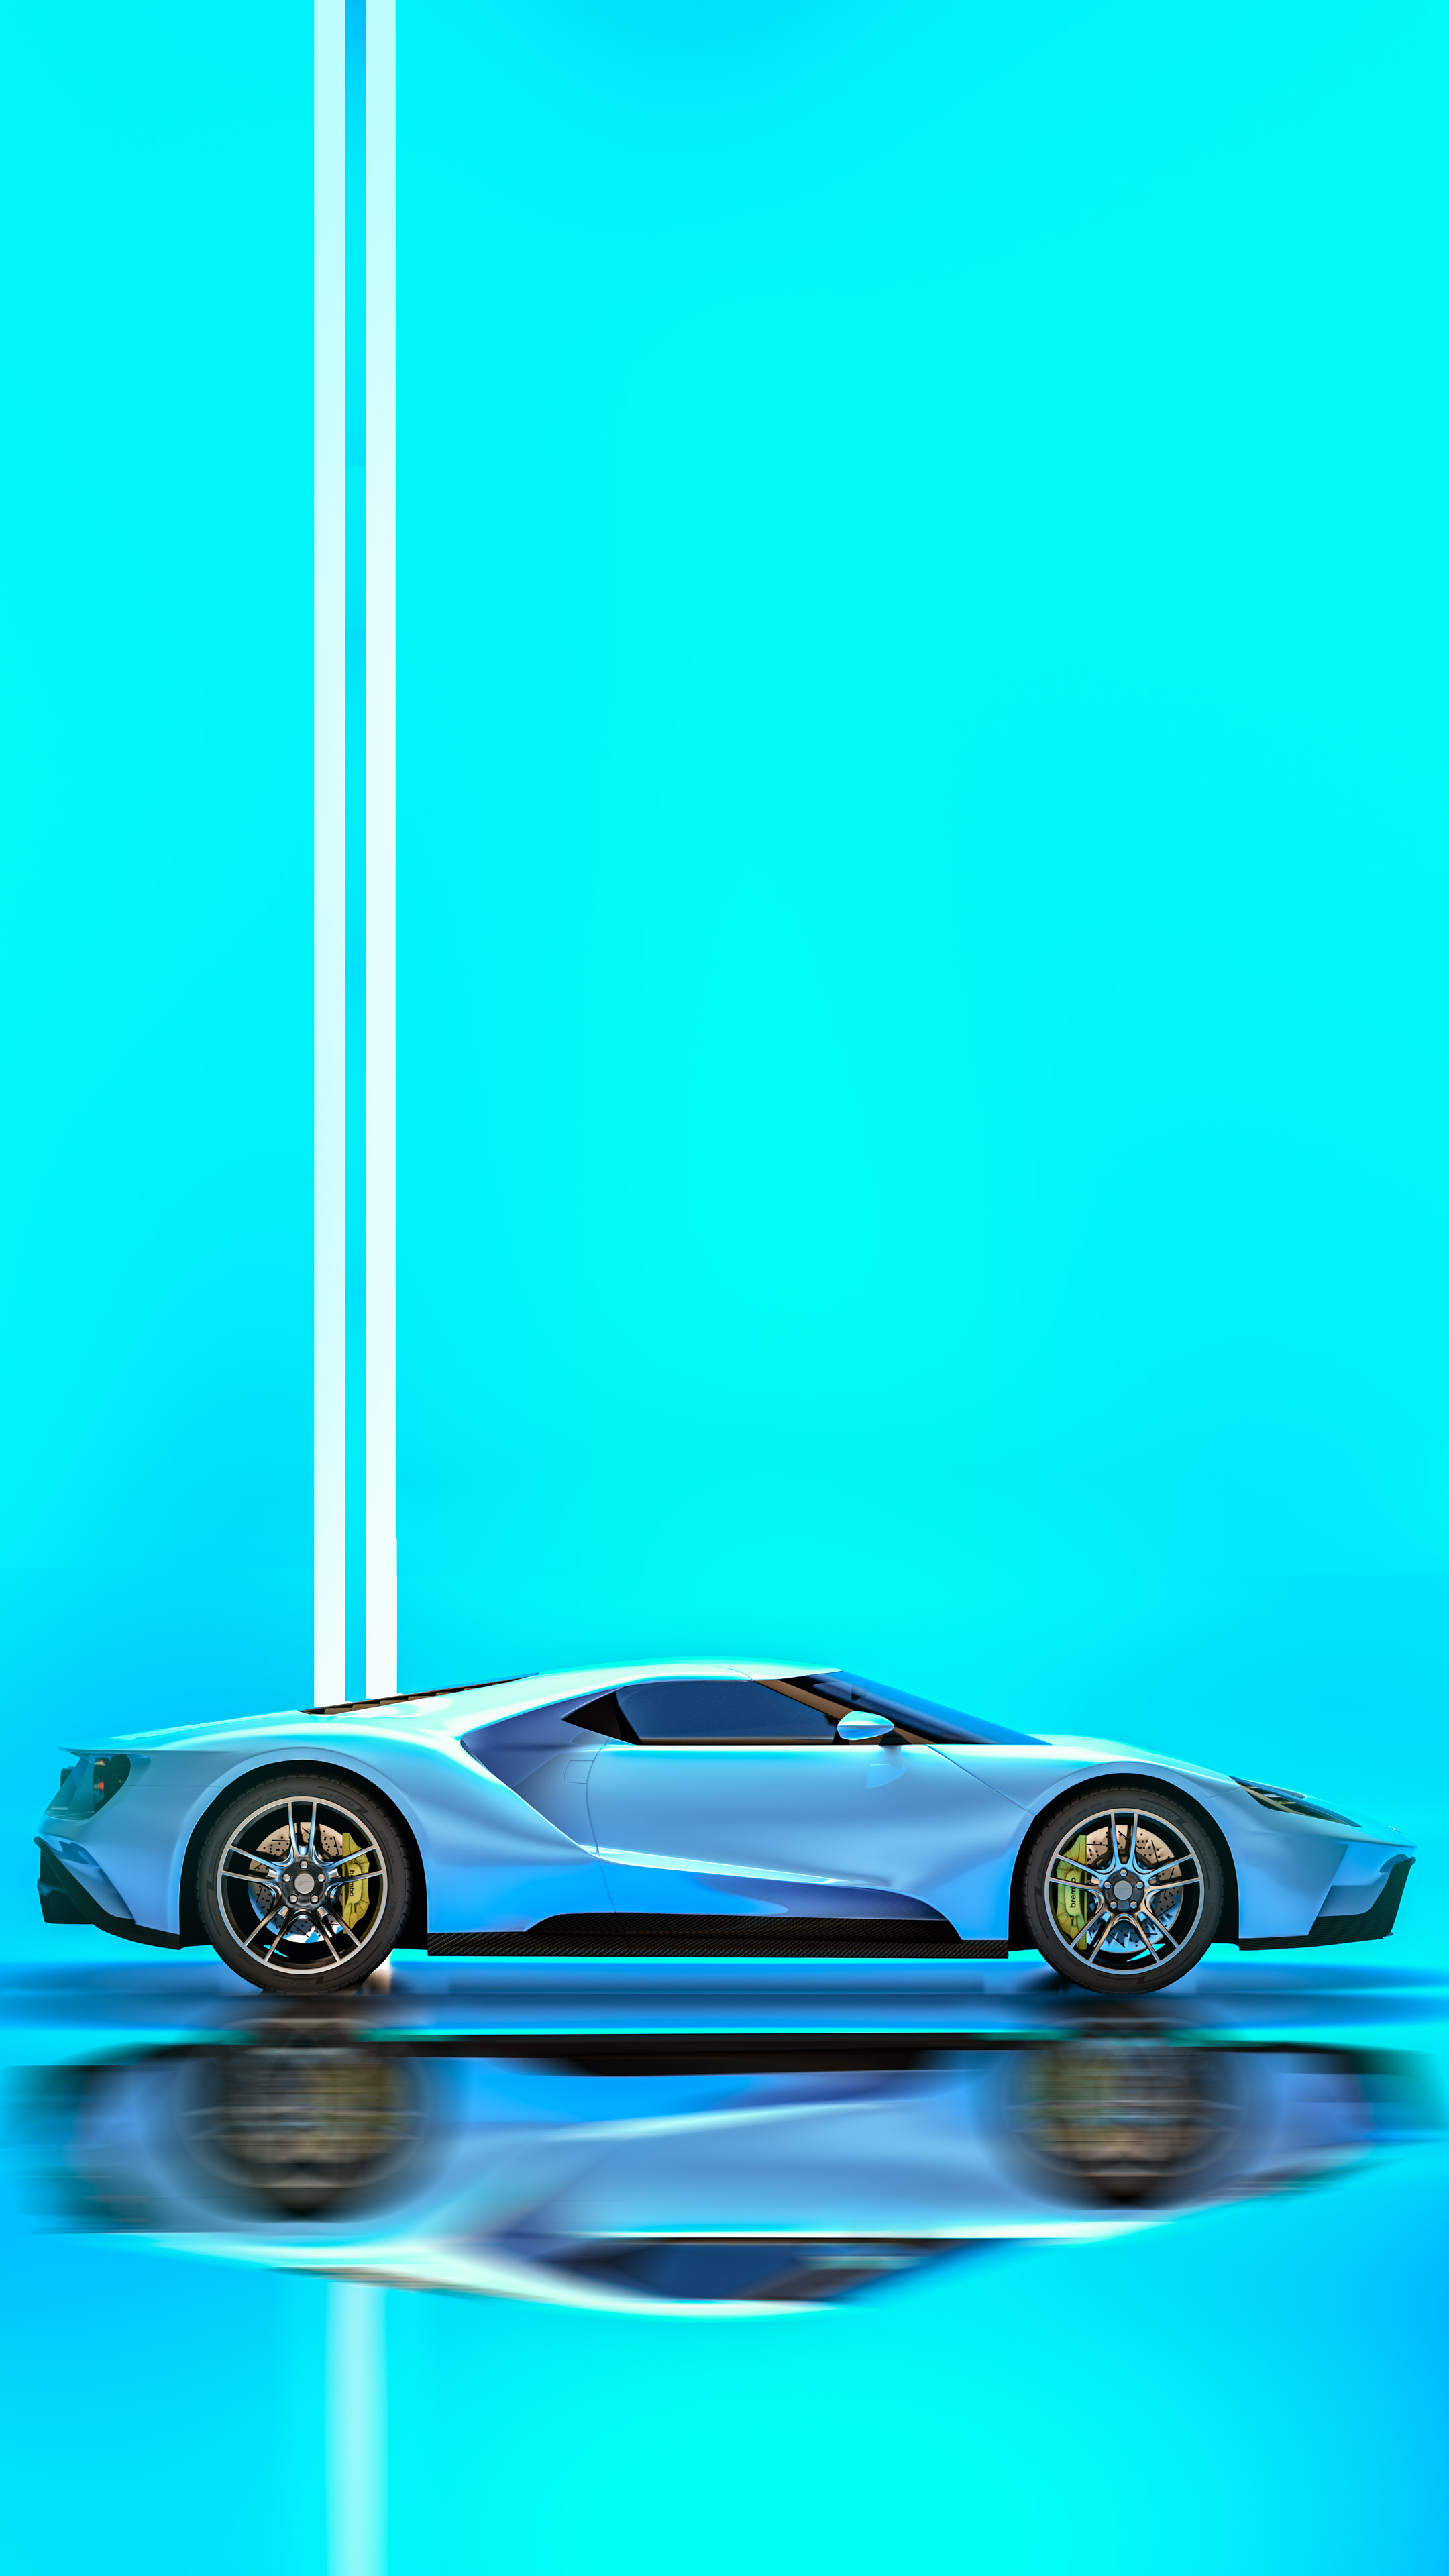 4Transform your PC with our Ford GT supercar car phone wallpaper, bringing the sleek design of this engineering marvel to your screen.